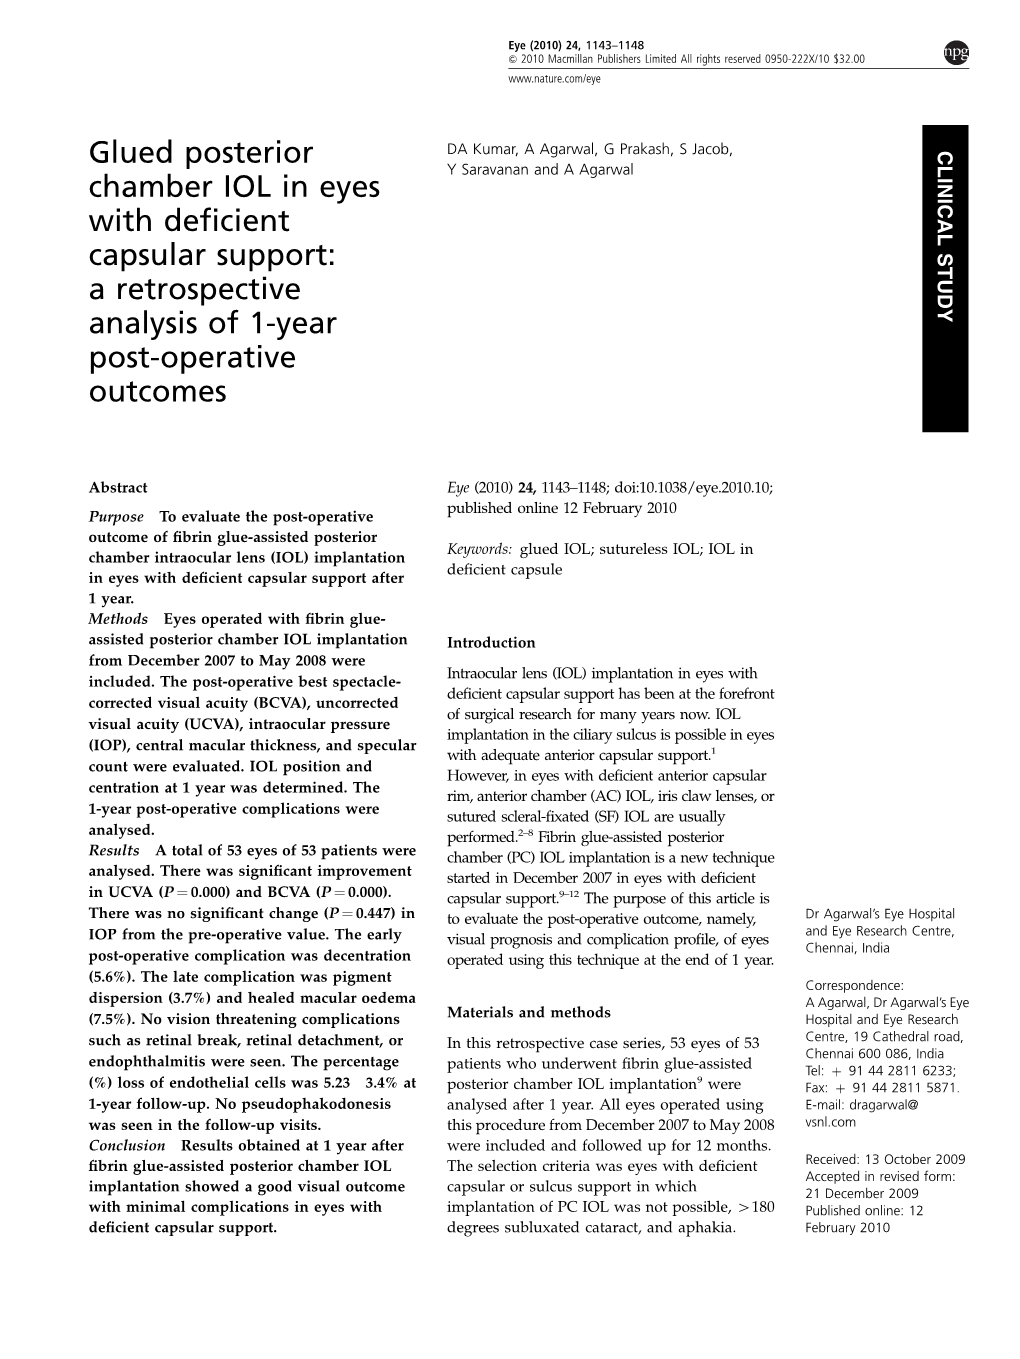 Glued Posterior Chamber IOL in Eyes with Deficient Capsular Support